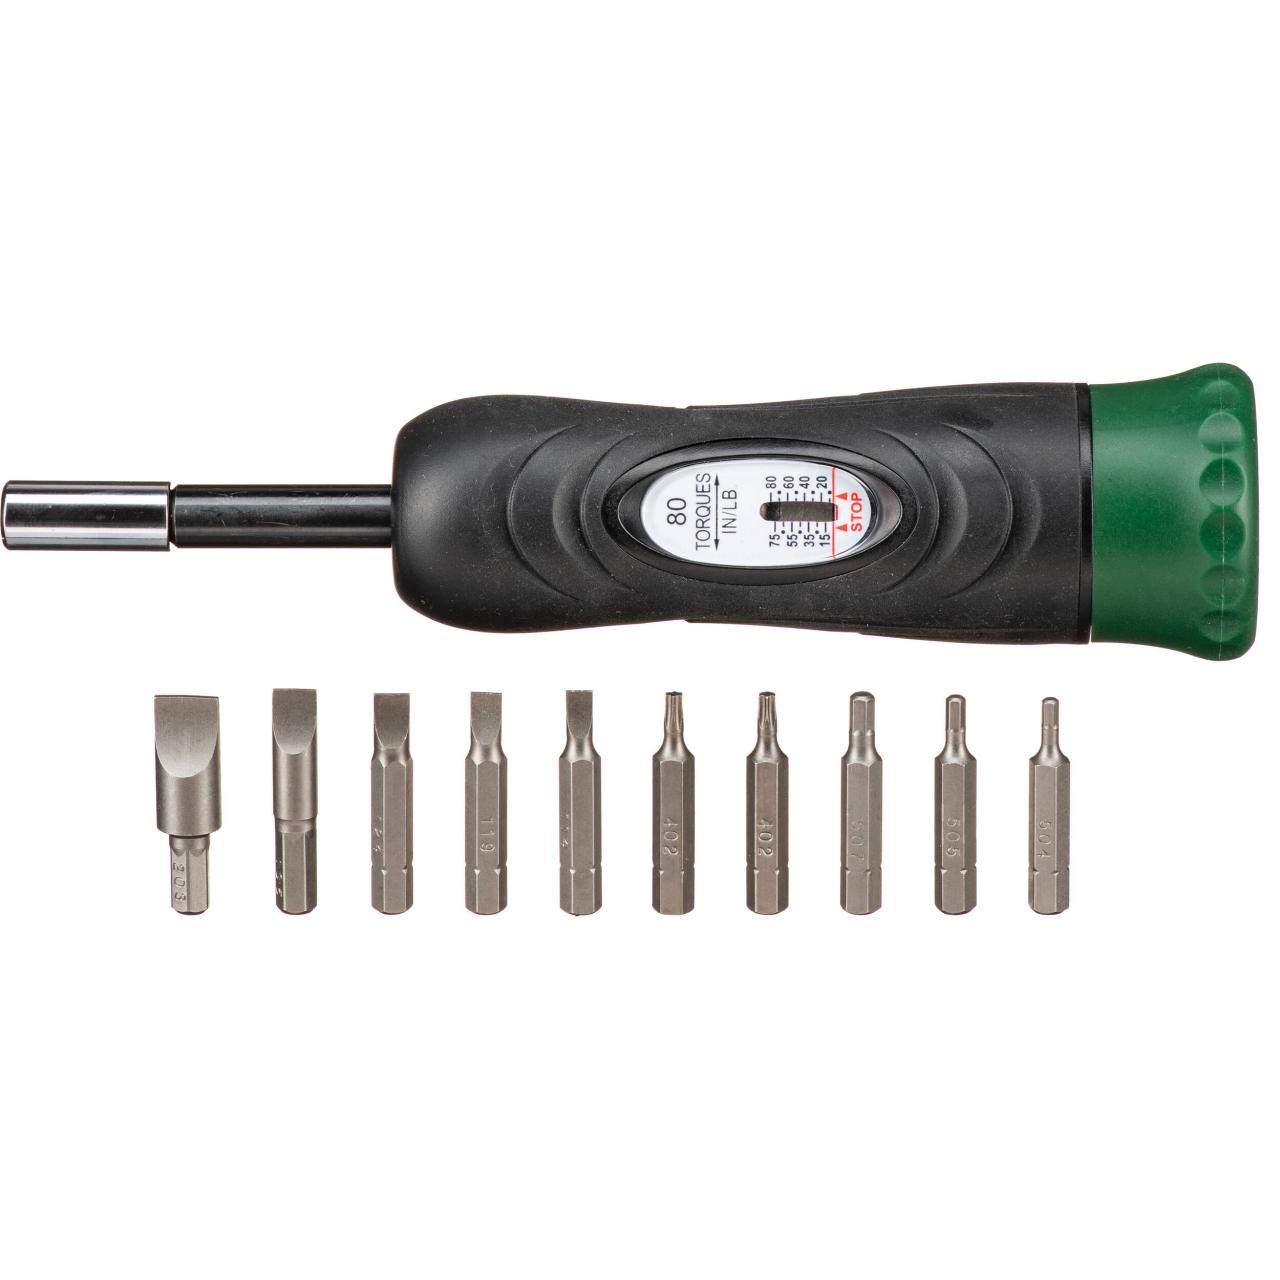 Buy Torque Wrench Kit and More | Weaver Optics